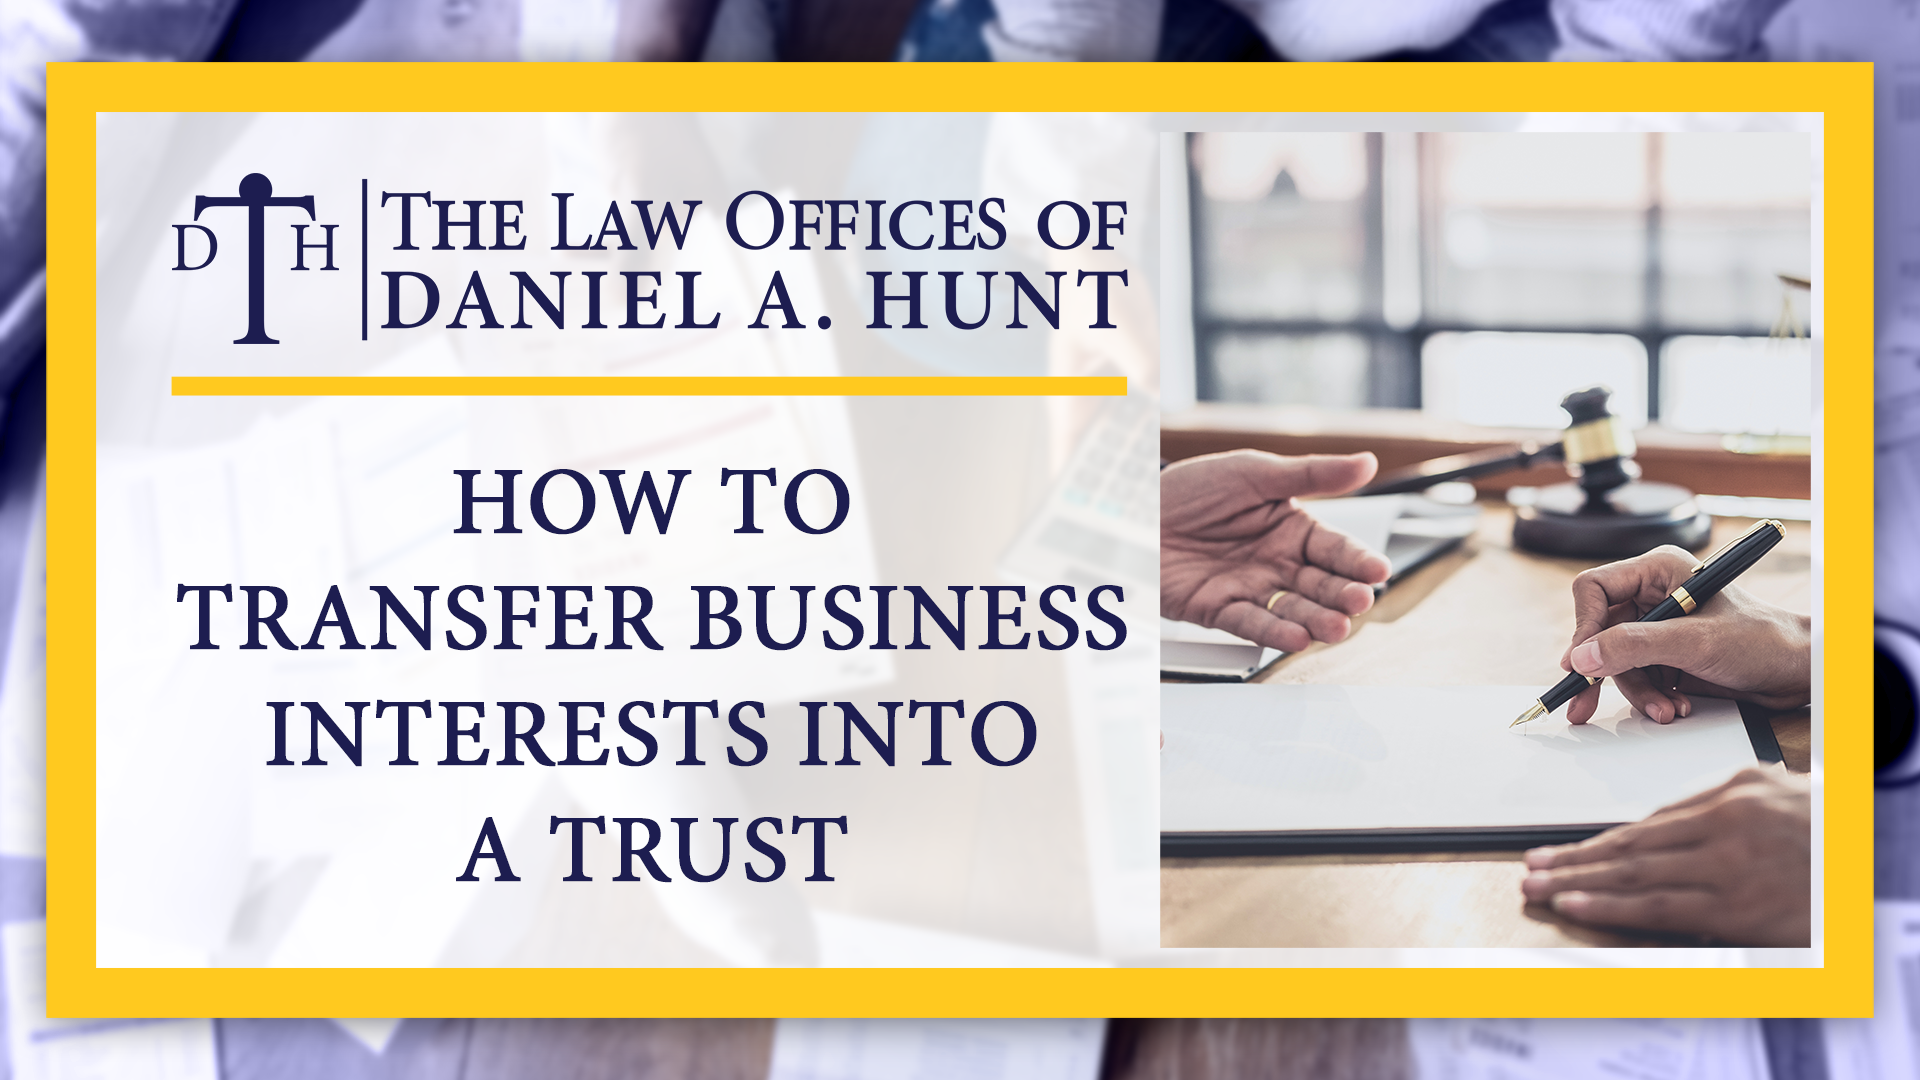 How-to-Transfer-Business-Interests-into-a-Trust